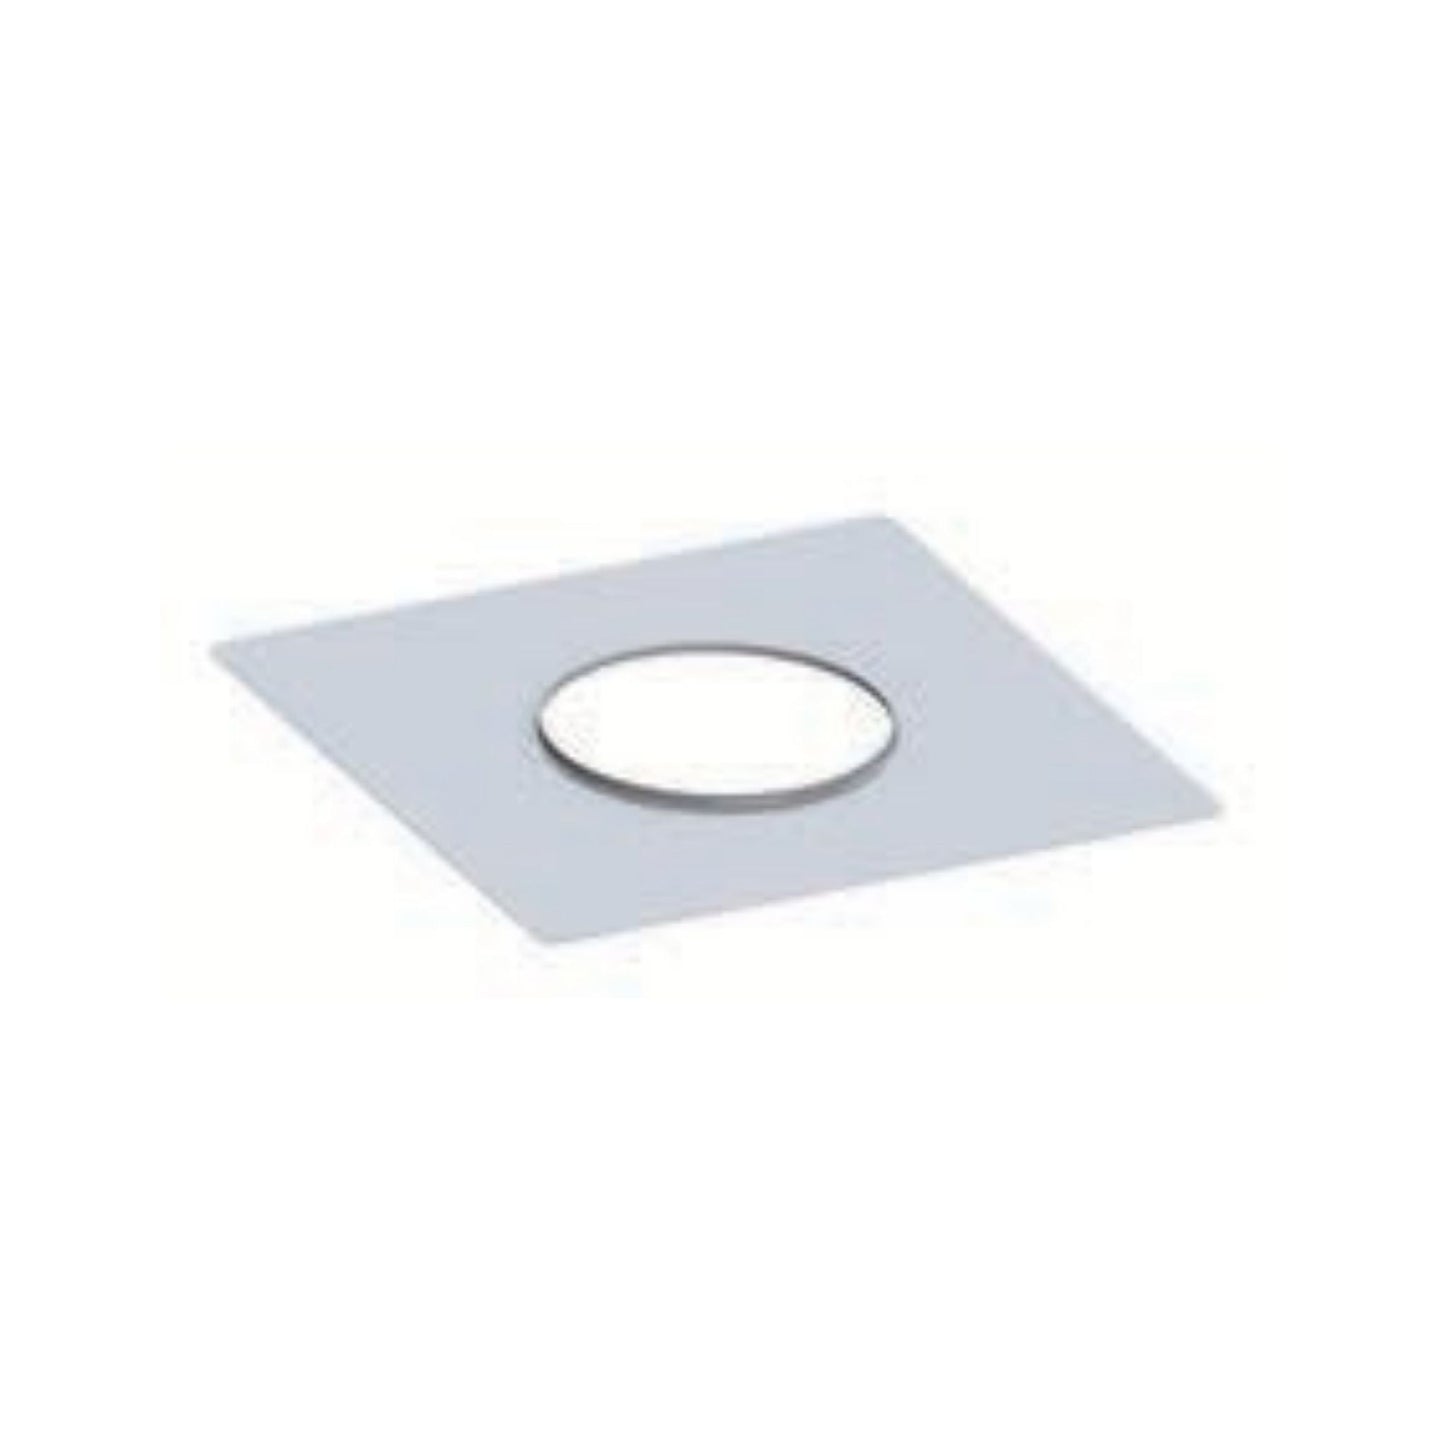 DuraVent FasNSeal Flex 10" Stainless Steel Top Cover Plate